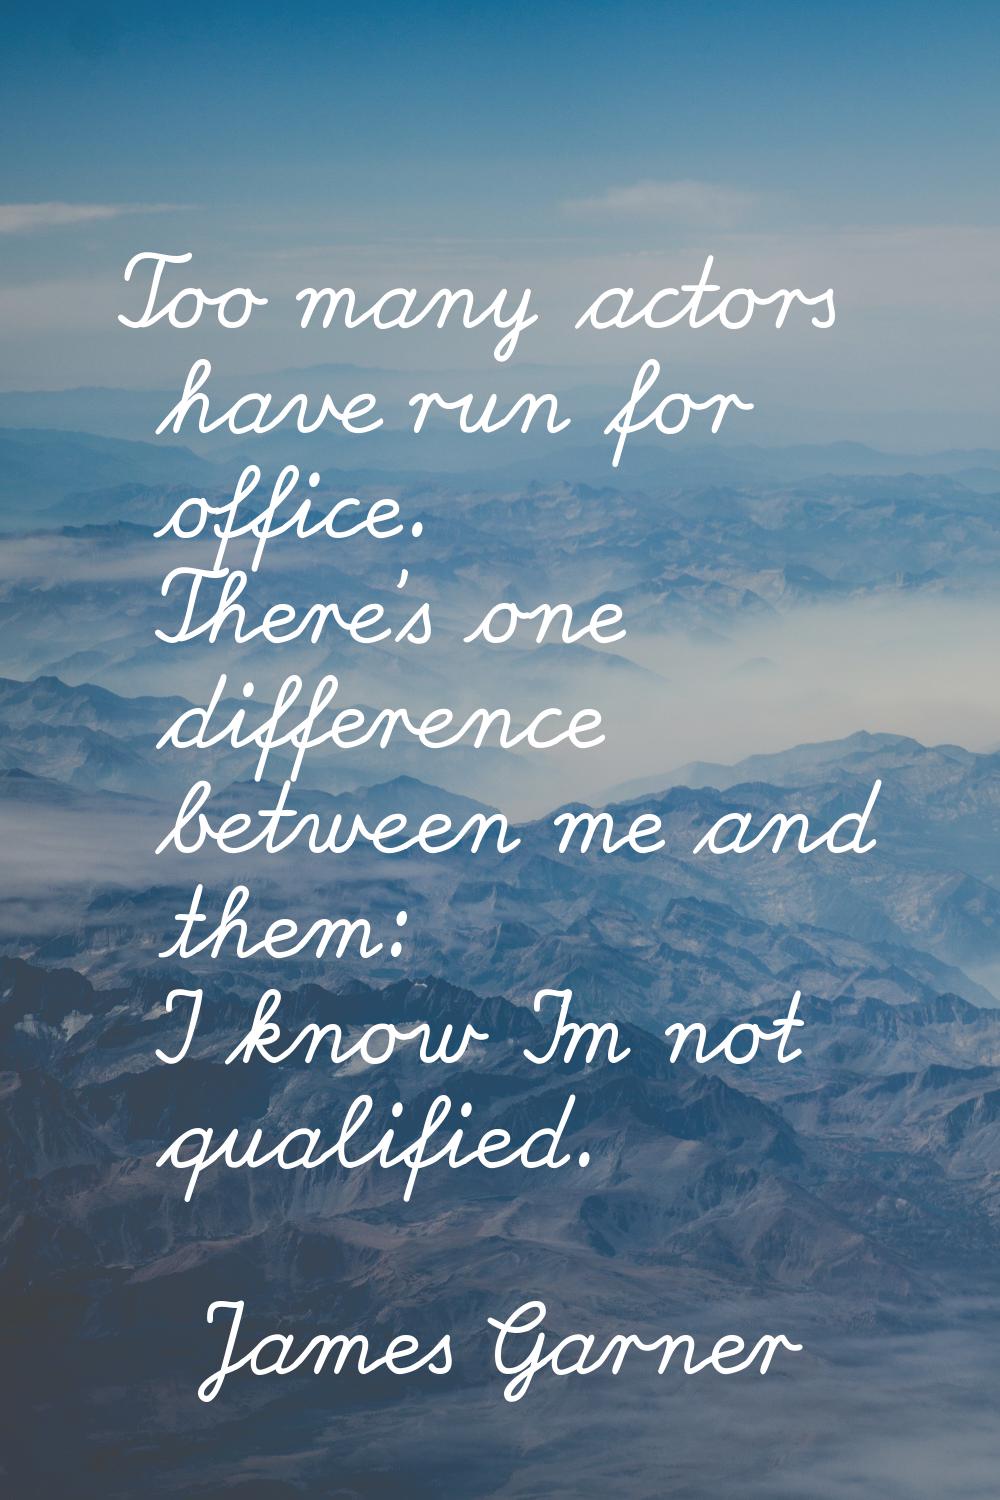 Too many actors have run for office. There's one difference between me and them: I know I'm not qua